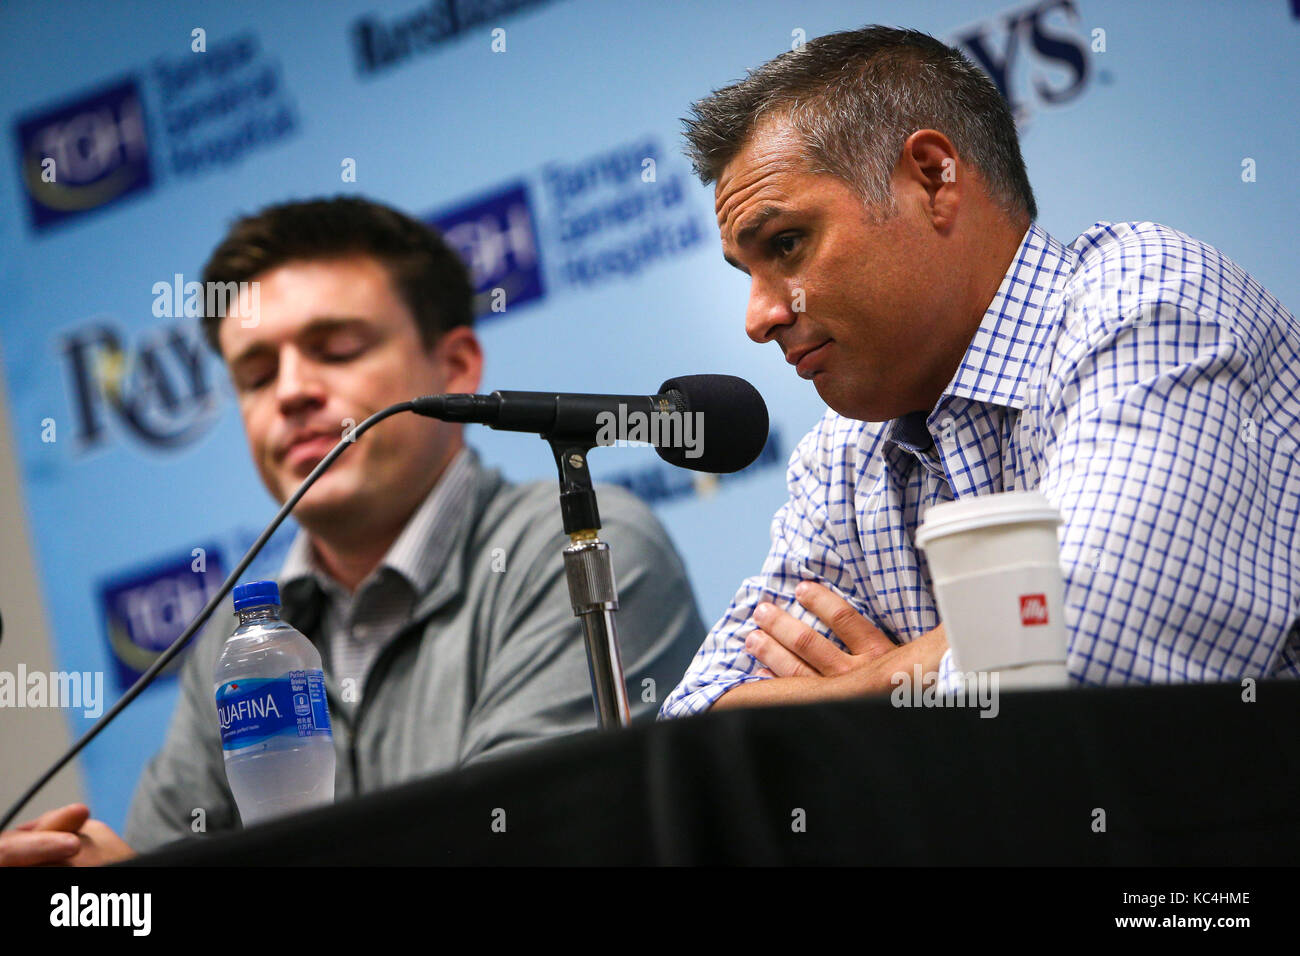 St. Petersburg, Florida, USA. 2nd Oct, 2017. WILL VRAGOVIC | Times.Tampa Bay Rays manager Kevin Cash answers questions during a press conference at Tropicana Field in St. Petersburg, Fla. on Monday, Oct. 2, 2017. Credit: Will Vragovic/Tampa Bay Times/ZUMA Wire/Alamy Live News Stock Photo